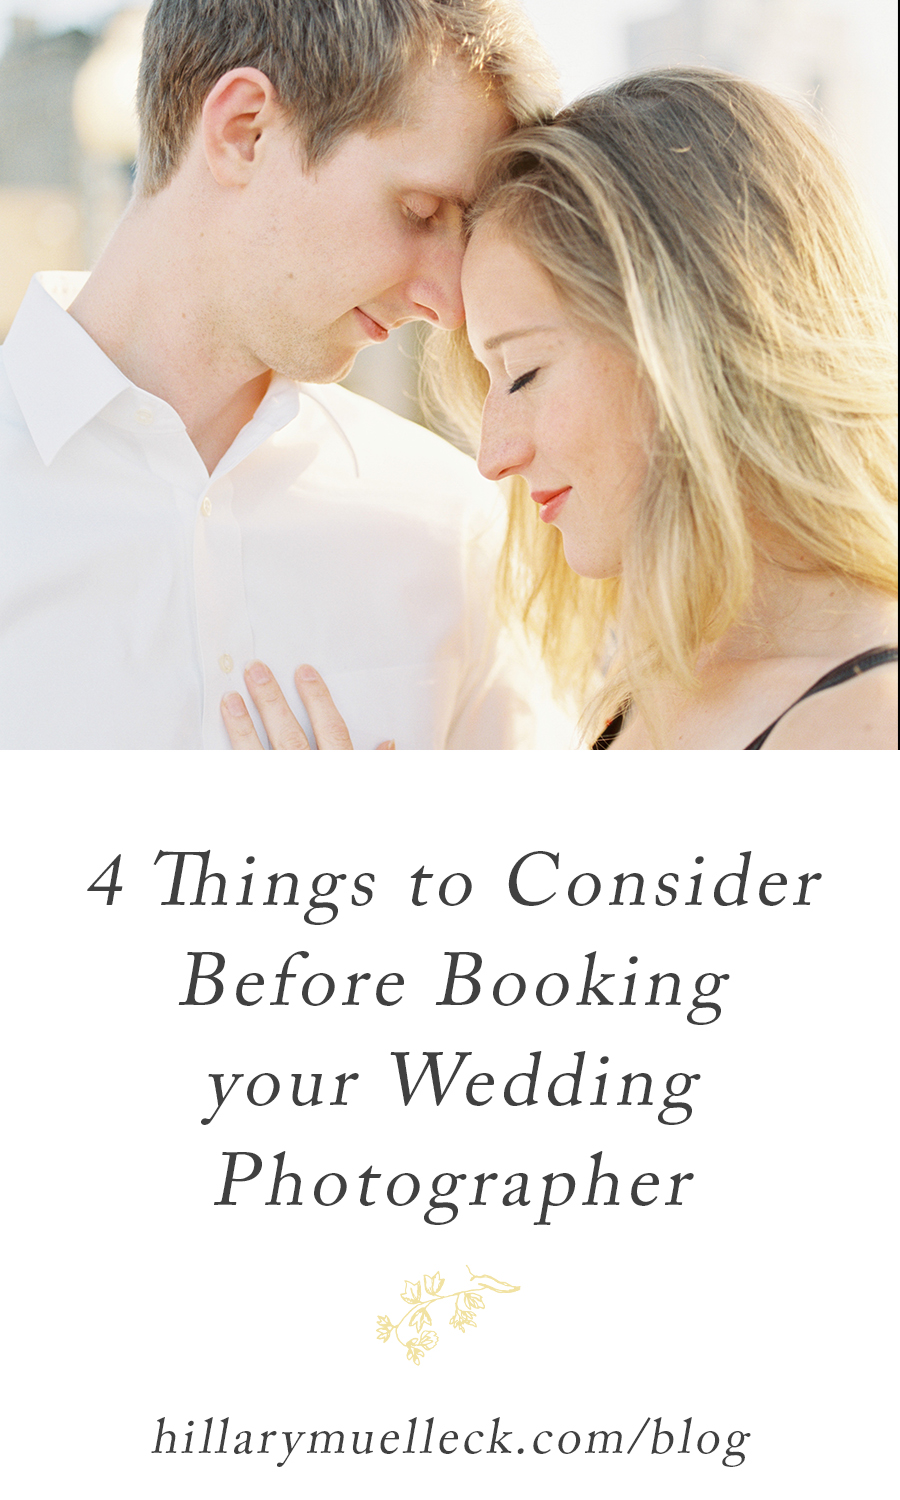 4 Things to Consider Before Booking your Wedding Photographer